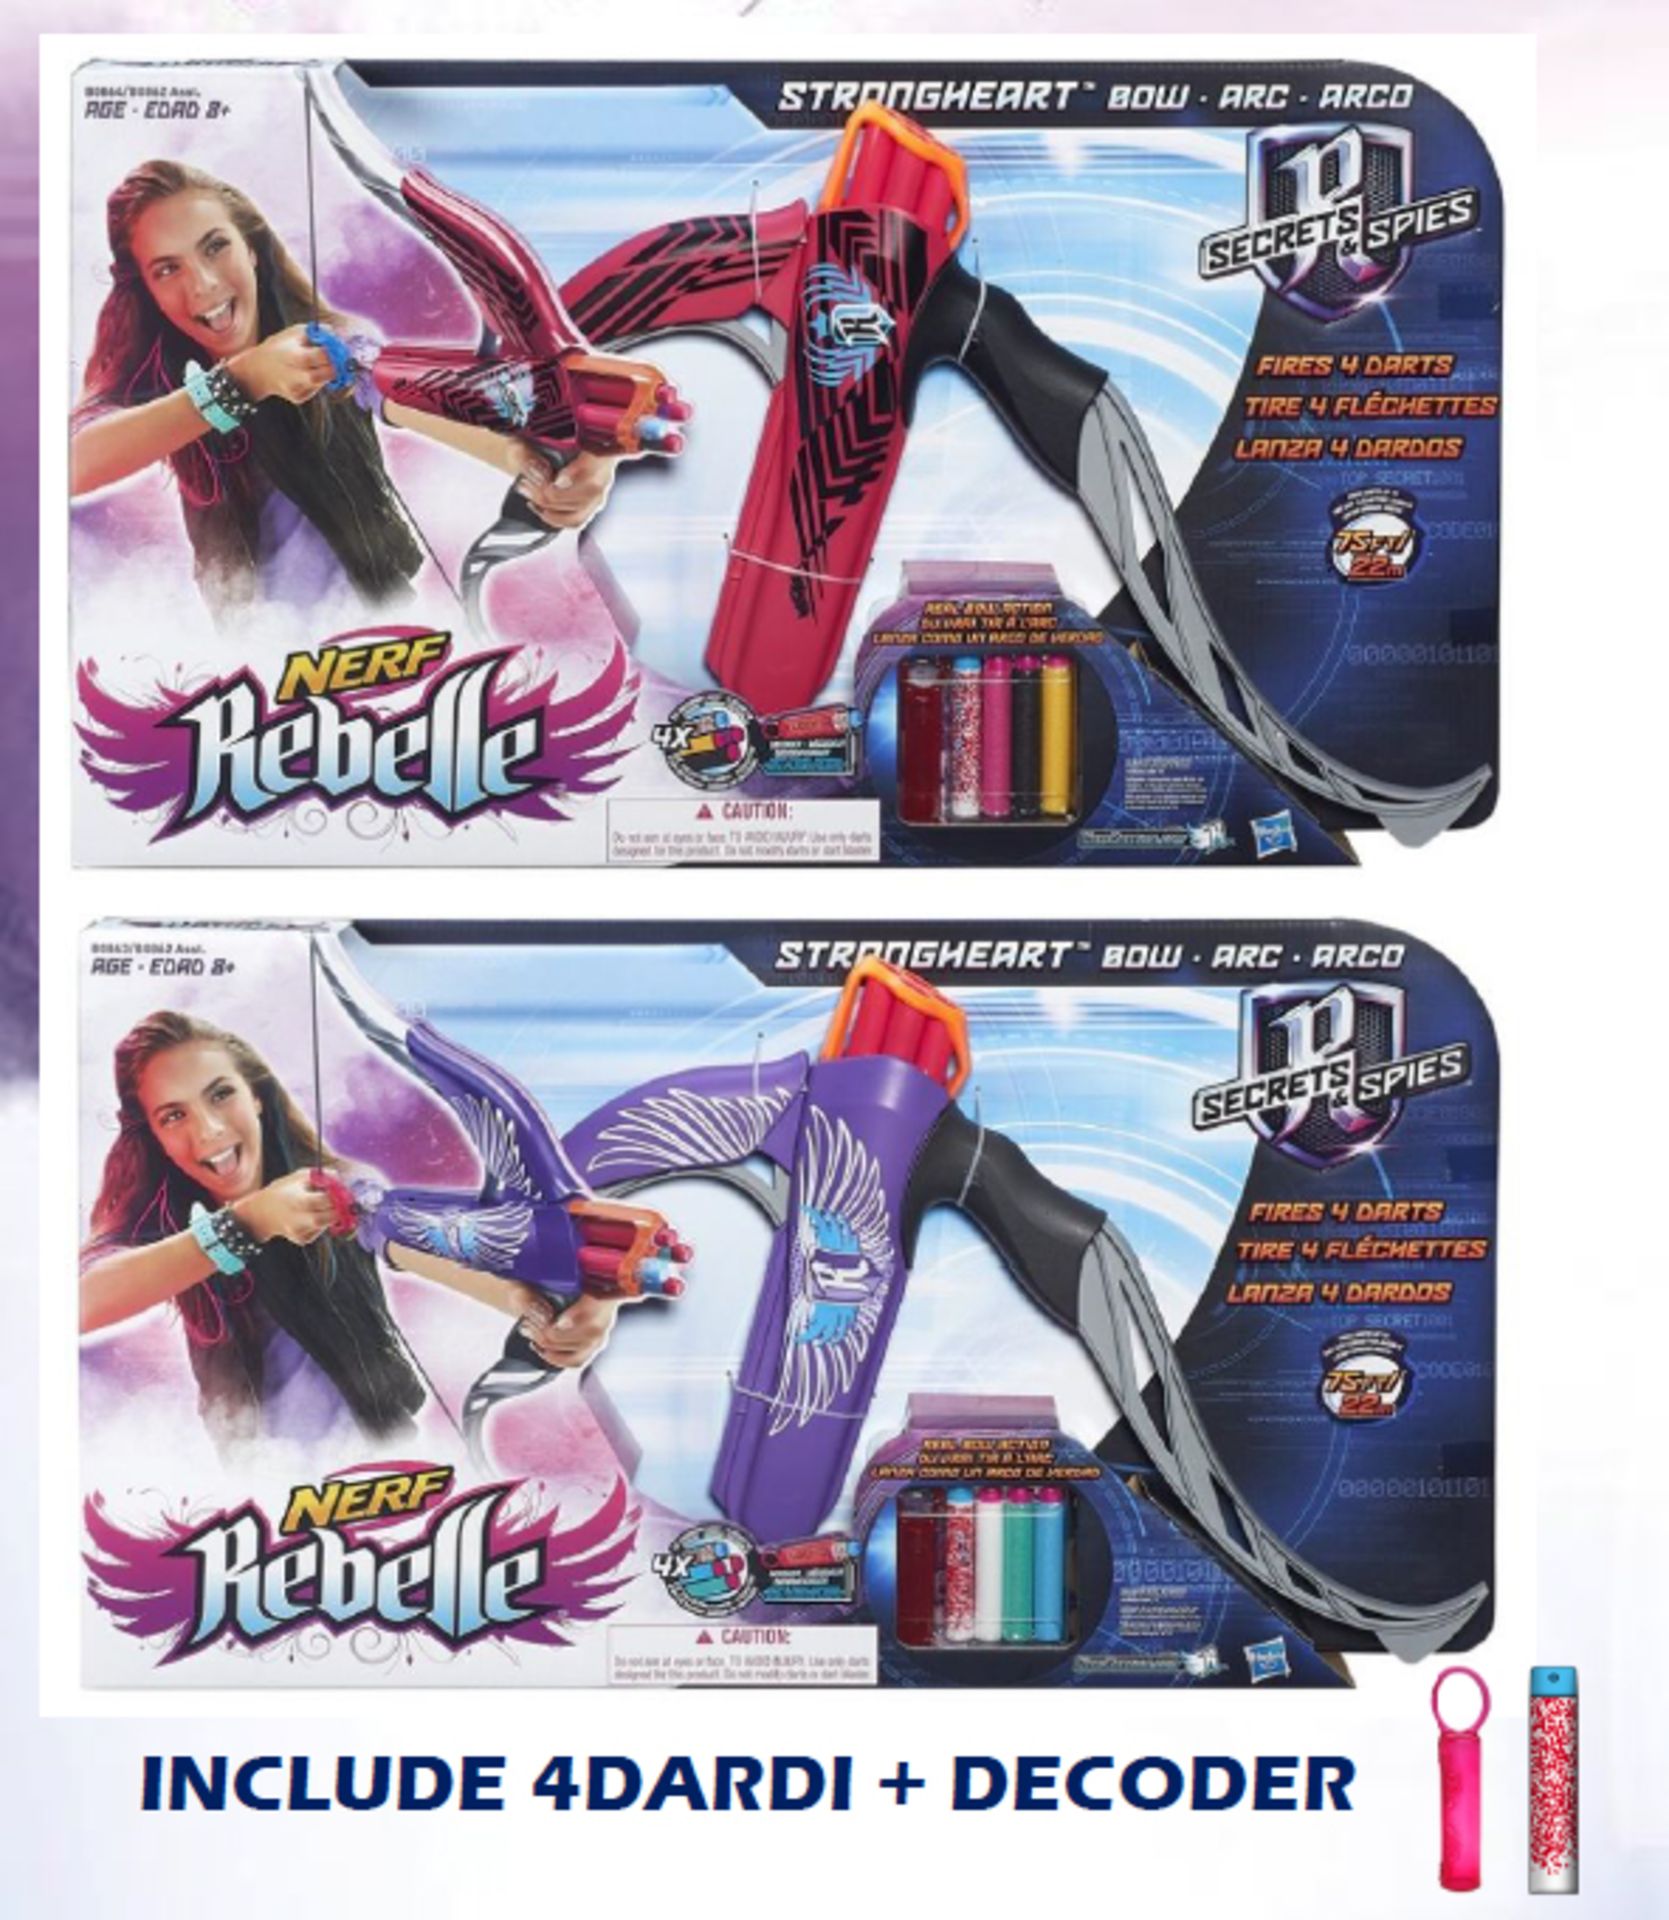 V *TRADE QTY* Brand New Nerf Rebelle Secrets and Spies Strongheart Bow X 3 YOUR BID PRICE TO BE